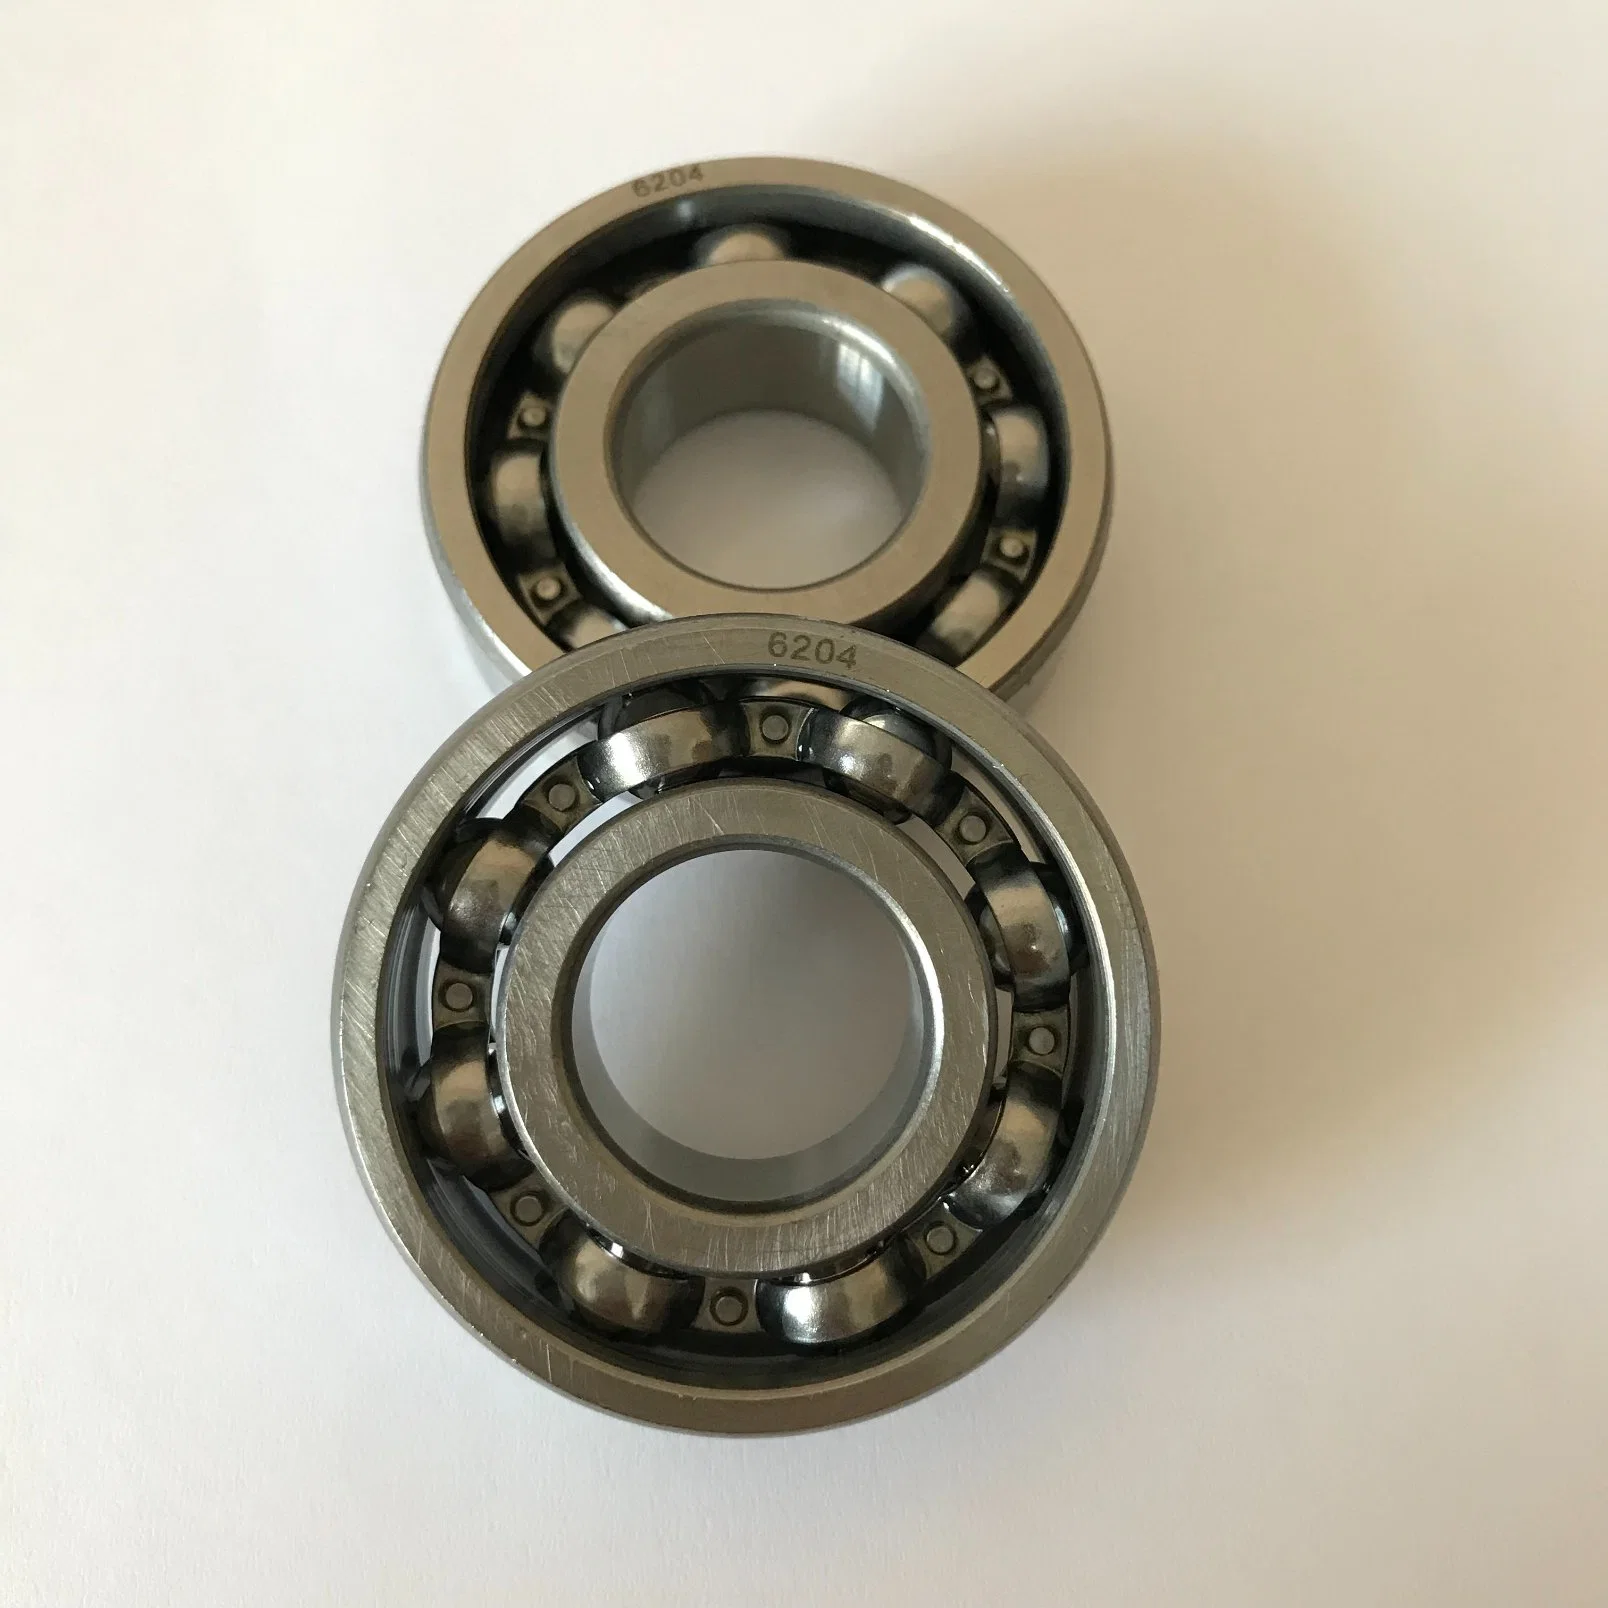 Deep Groove Ball Bearing 6201 6202 6203 6204 6205 Zz 2RS C3 Bearing for Auto Parts Agricultural Machinery